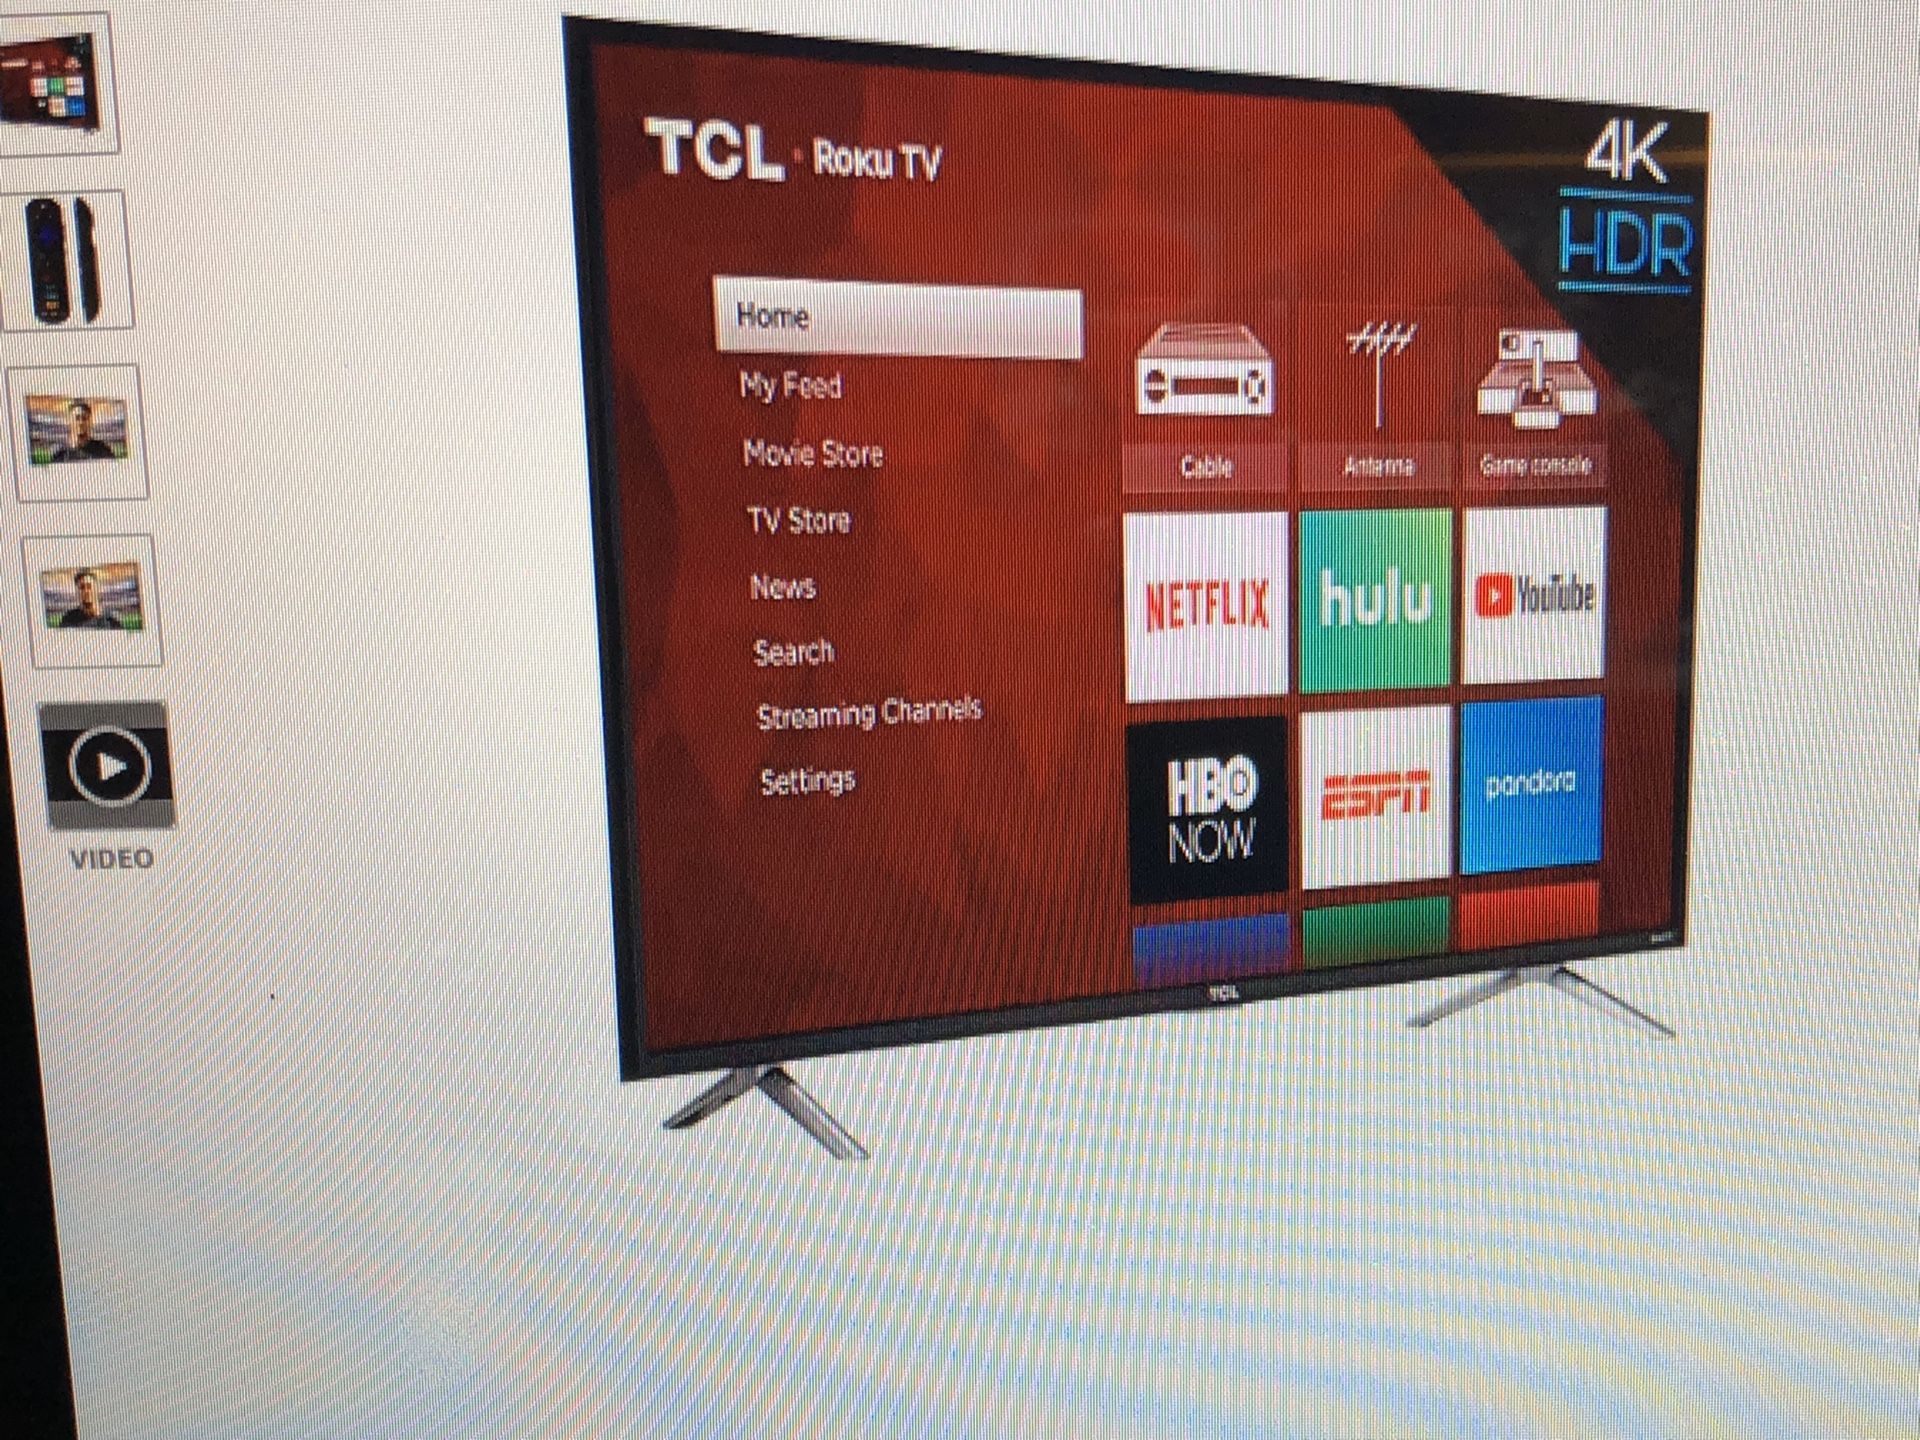 TCL Roku tv 4K hdr (tcl-49s405) 49 inch